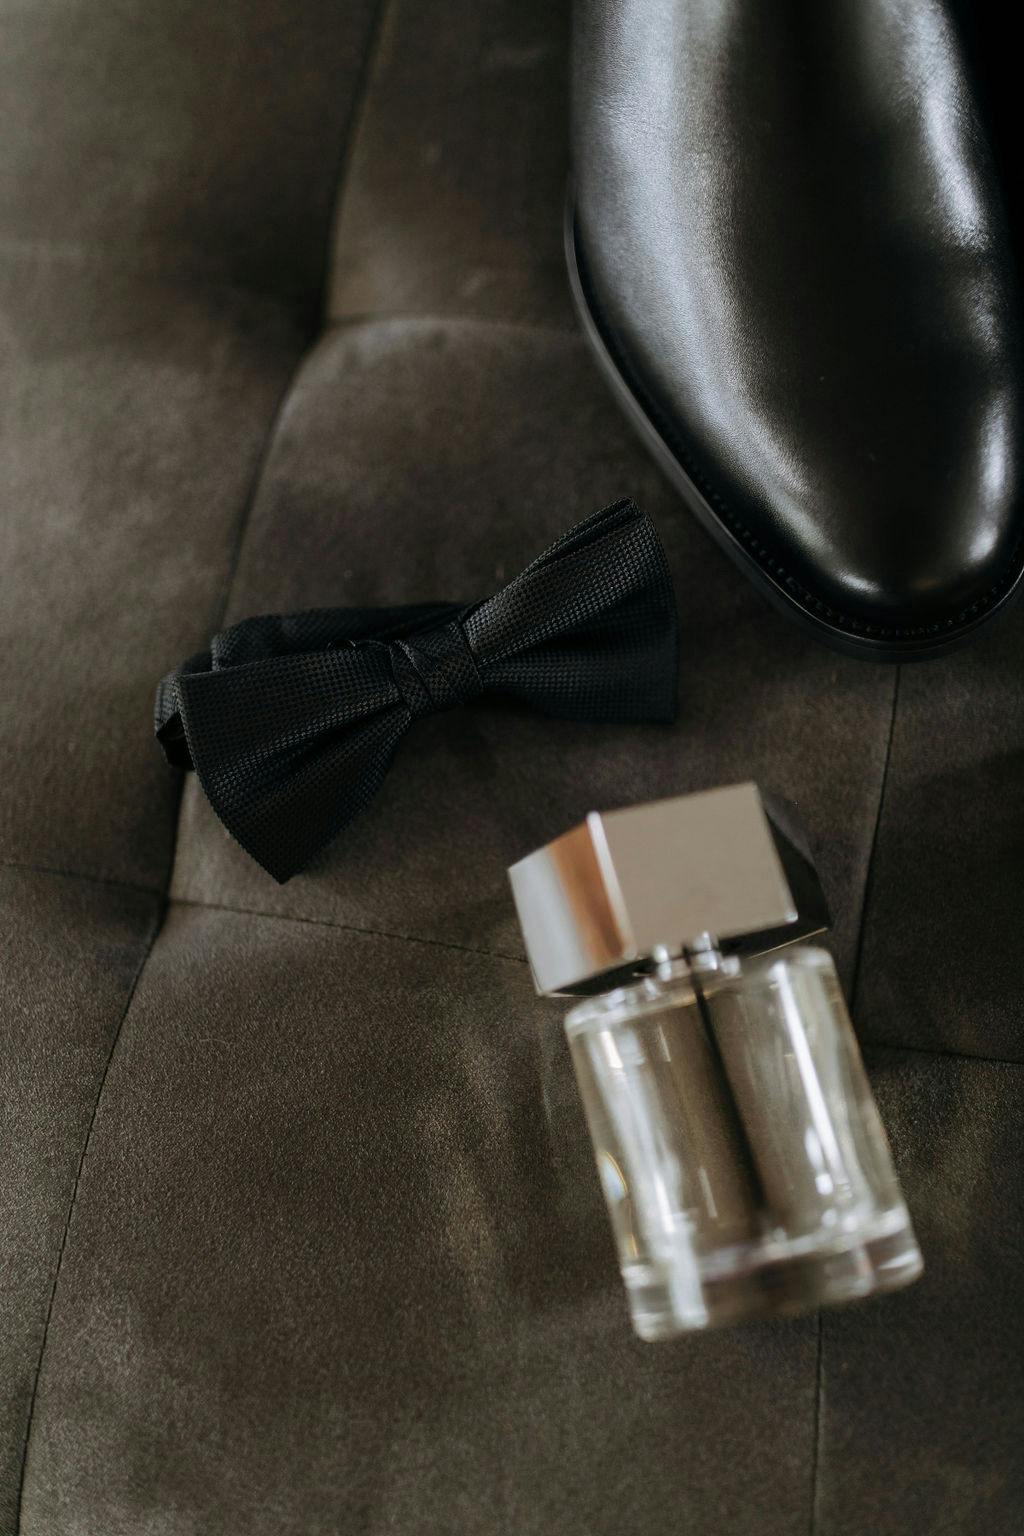 Close-up of a black bow tie, a clear square glass bottle with a silver cap, and the toe of a polished black dress shoe placed on a dark, tufted fabric surface.